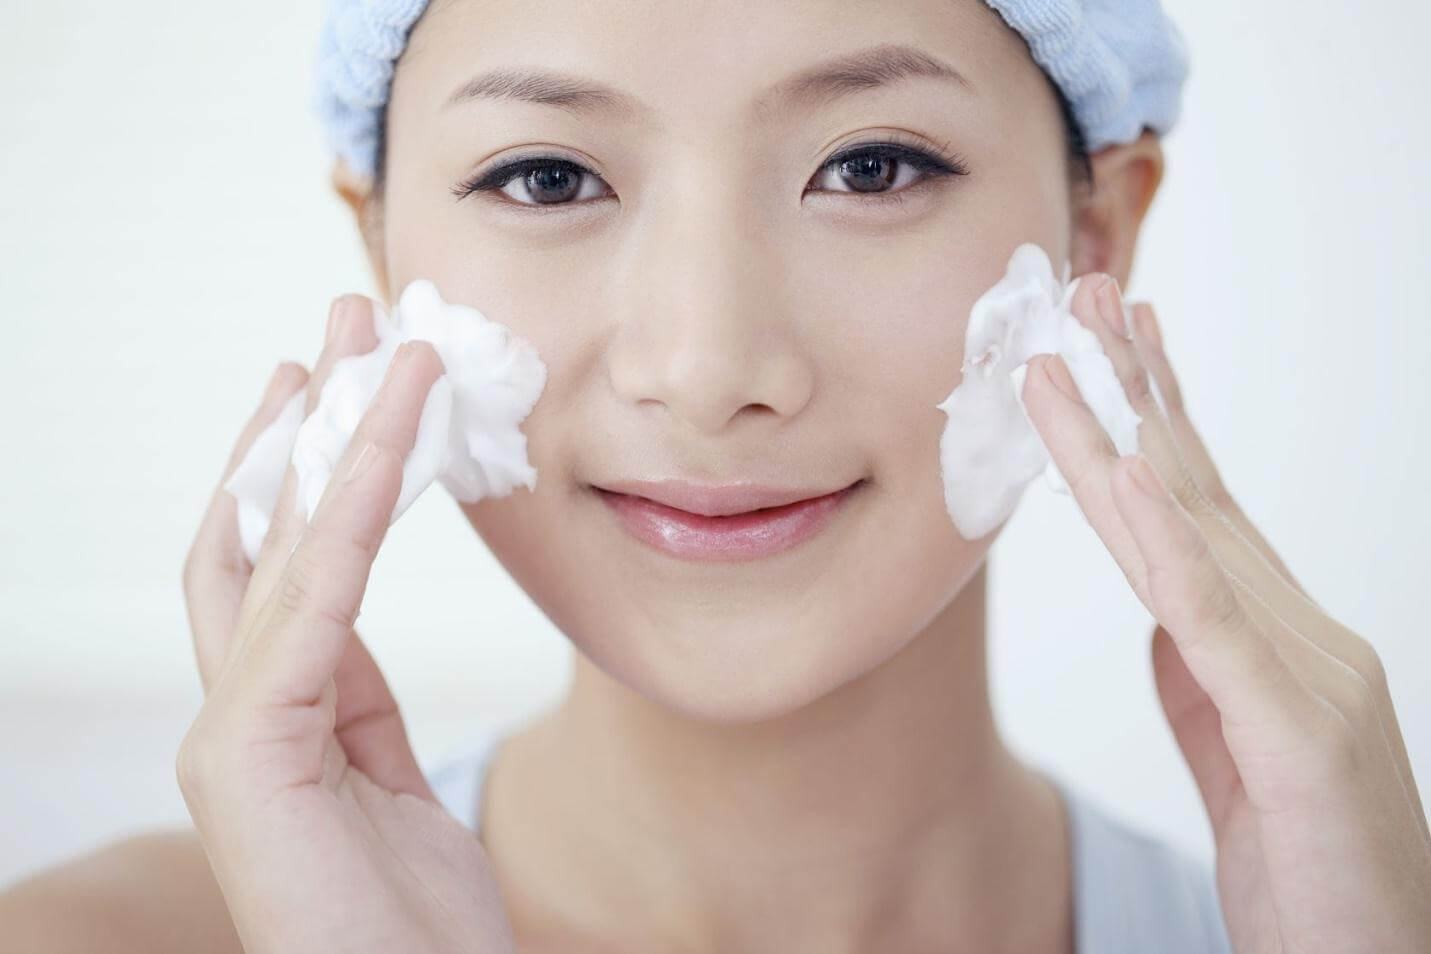 Dry & Sensitive Skin Care: Are You Making a Mistake? Really